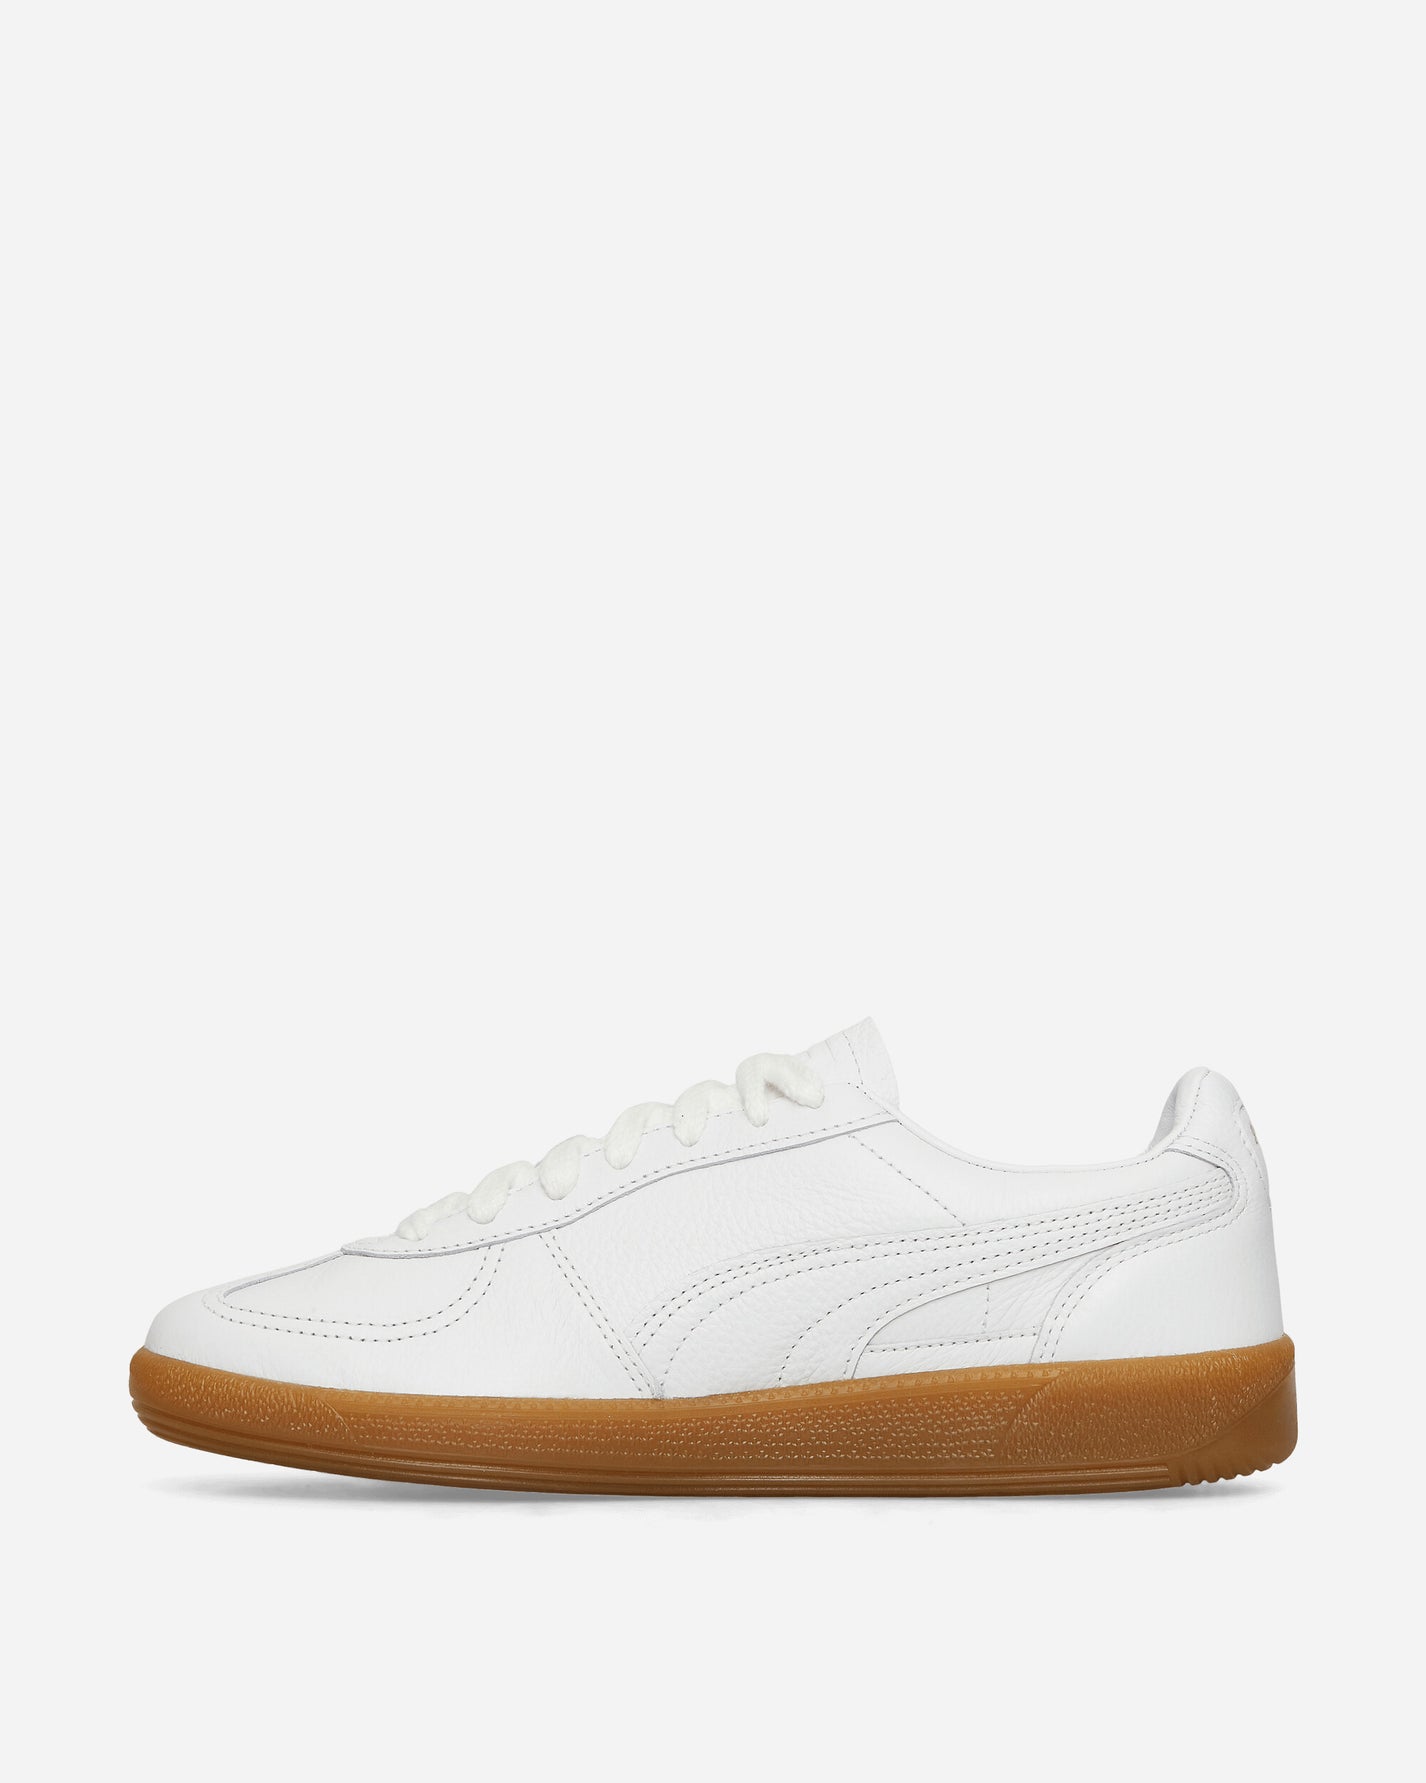 Puma Palermo Premium Puma White/Frosted Ivory Sneakers Low 397246-01